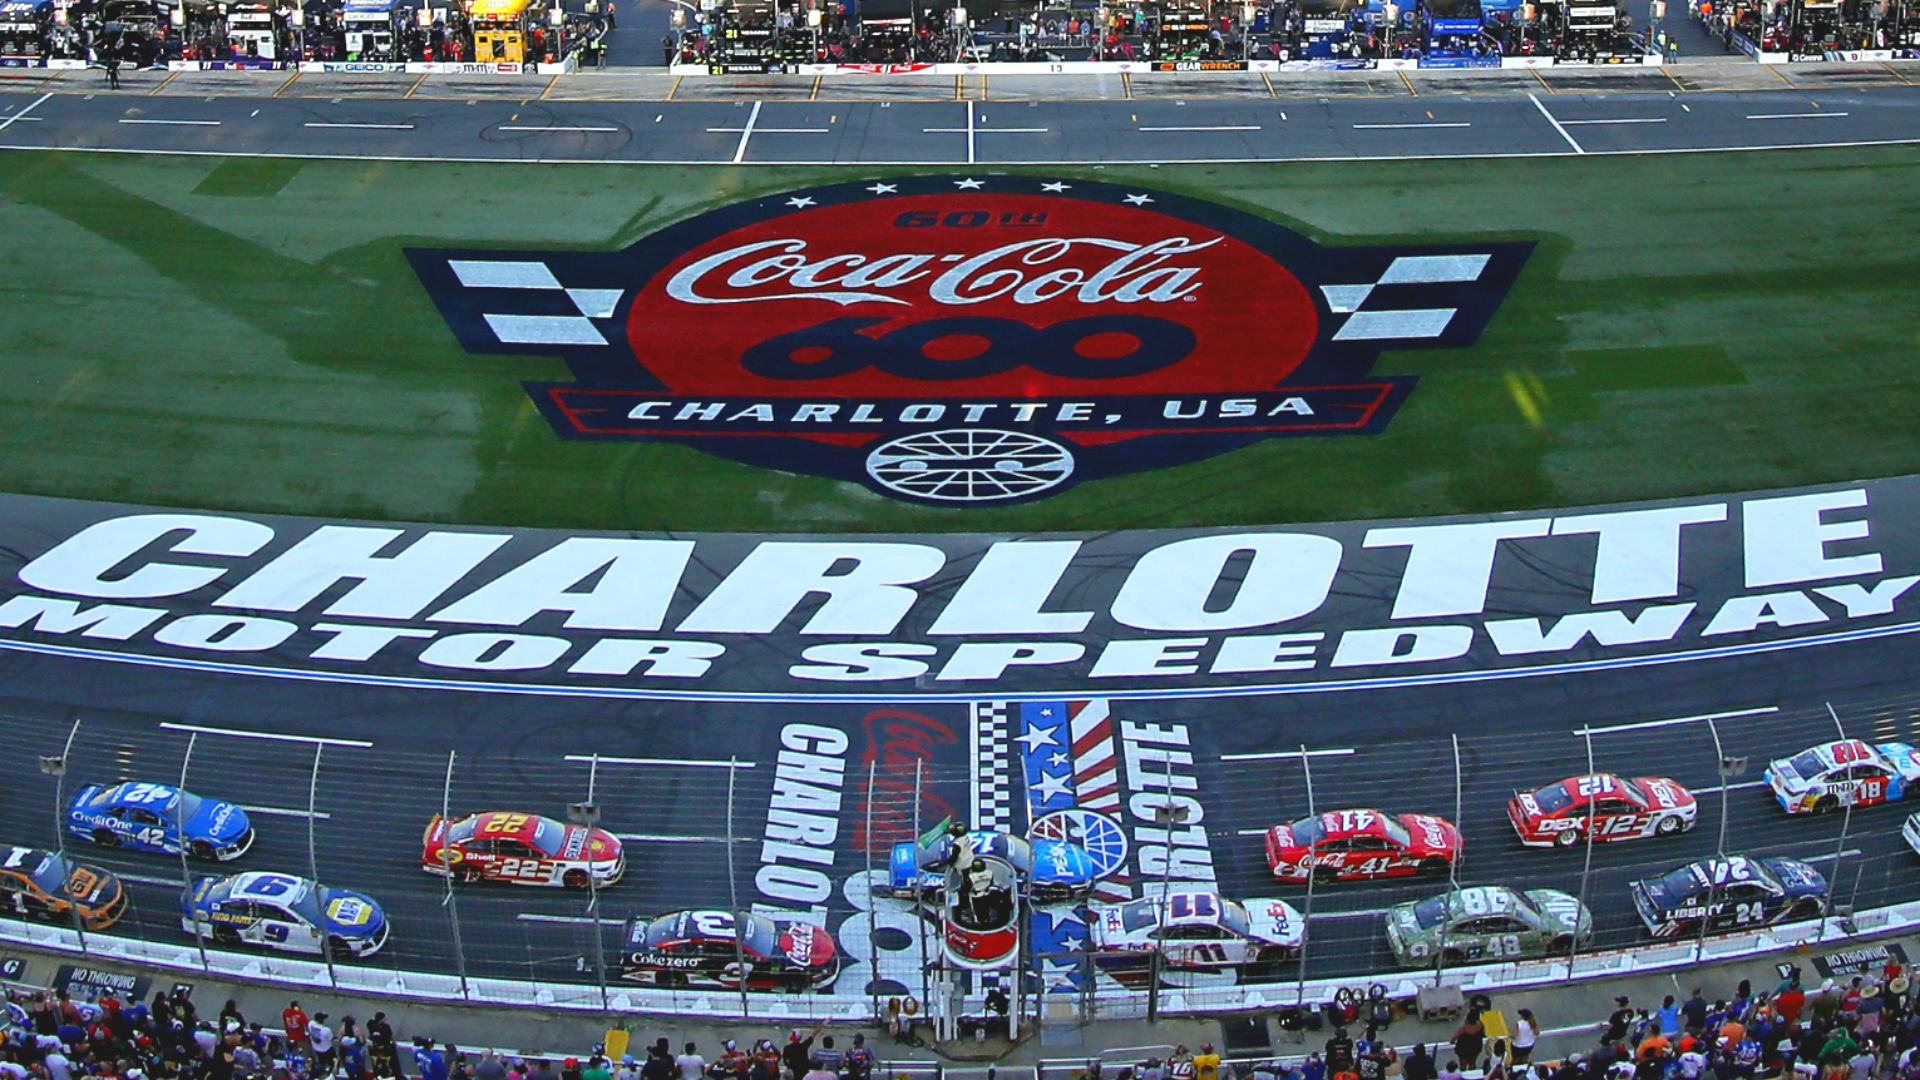 NASCAR race weather: Will rain in the Charlotte forecast delay